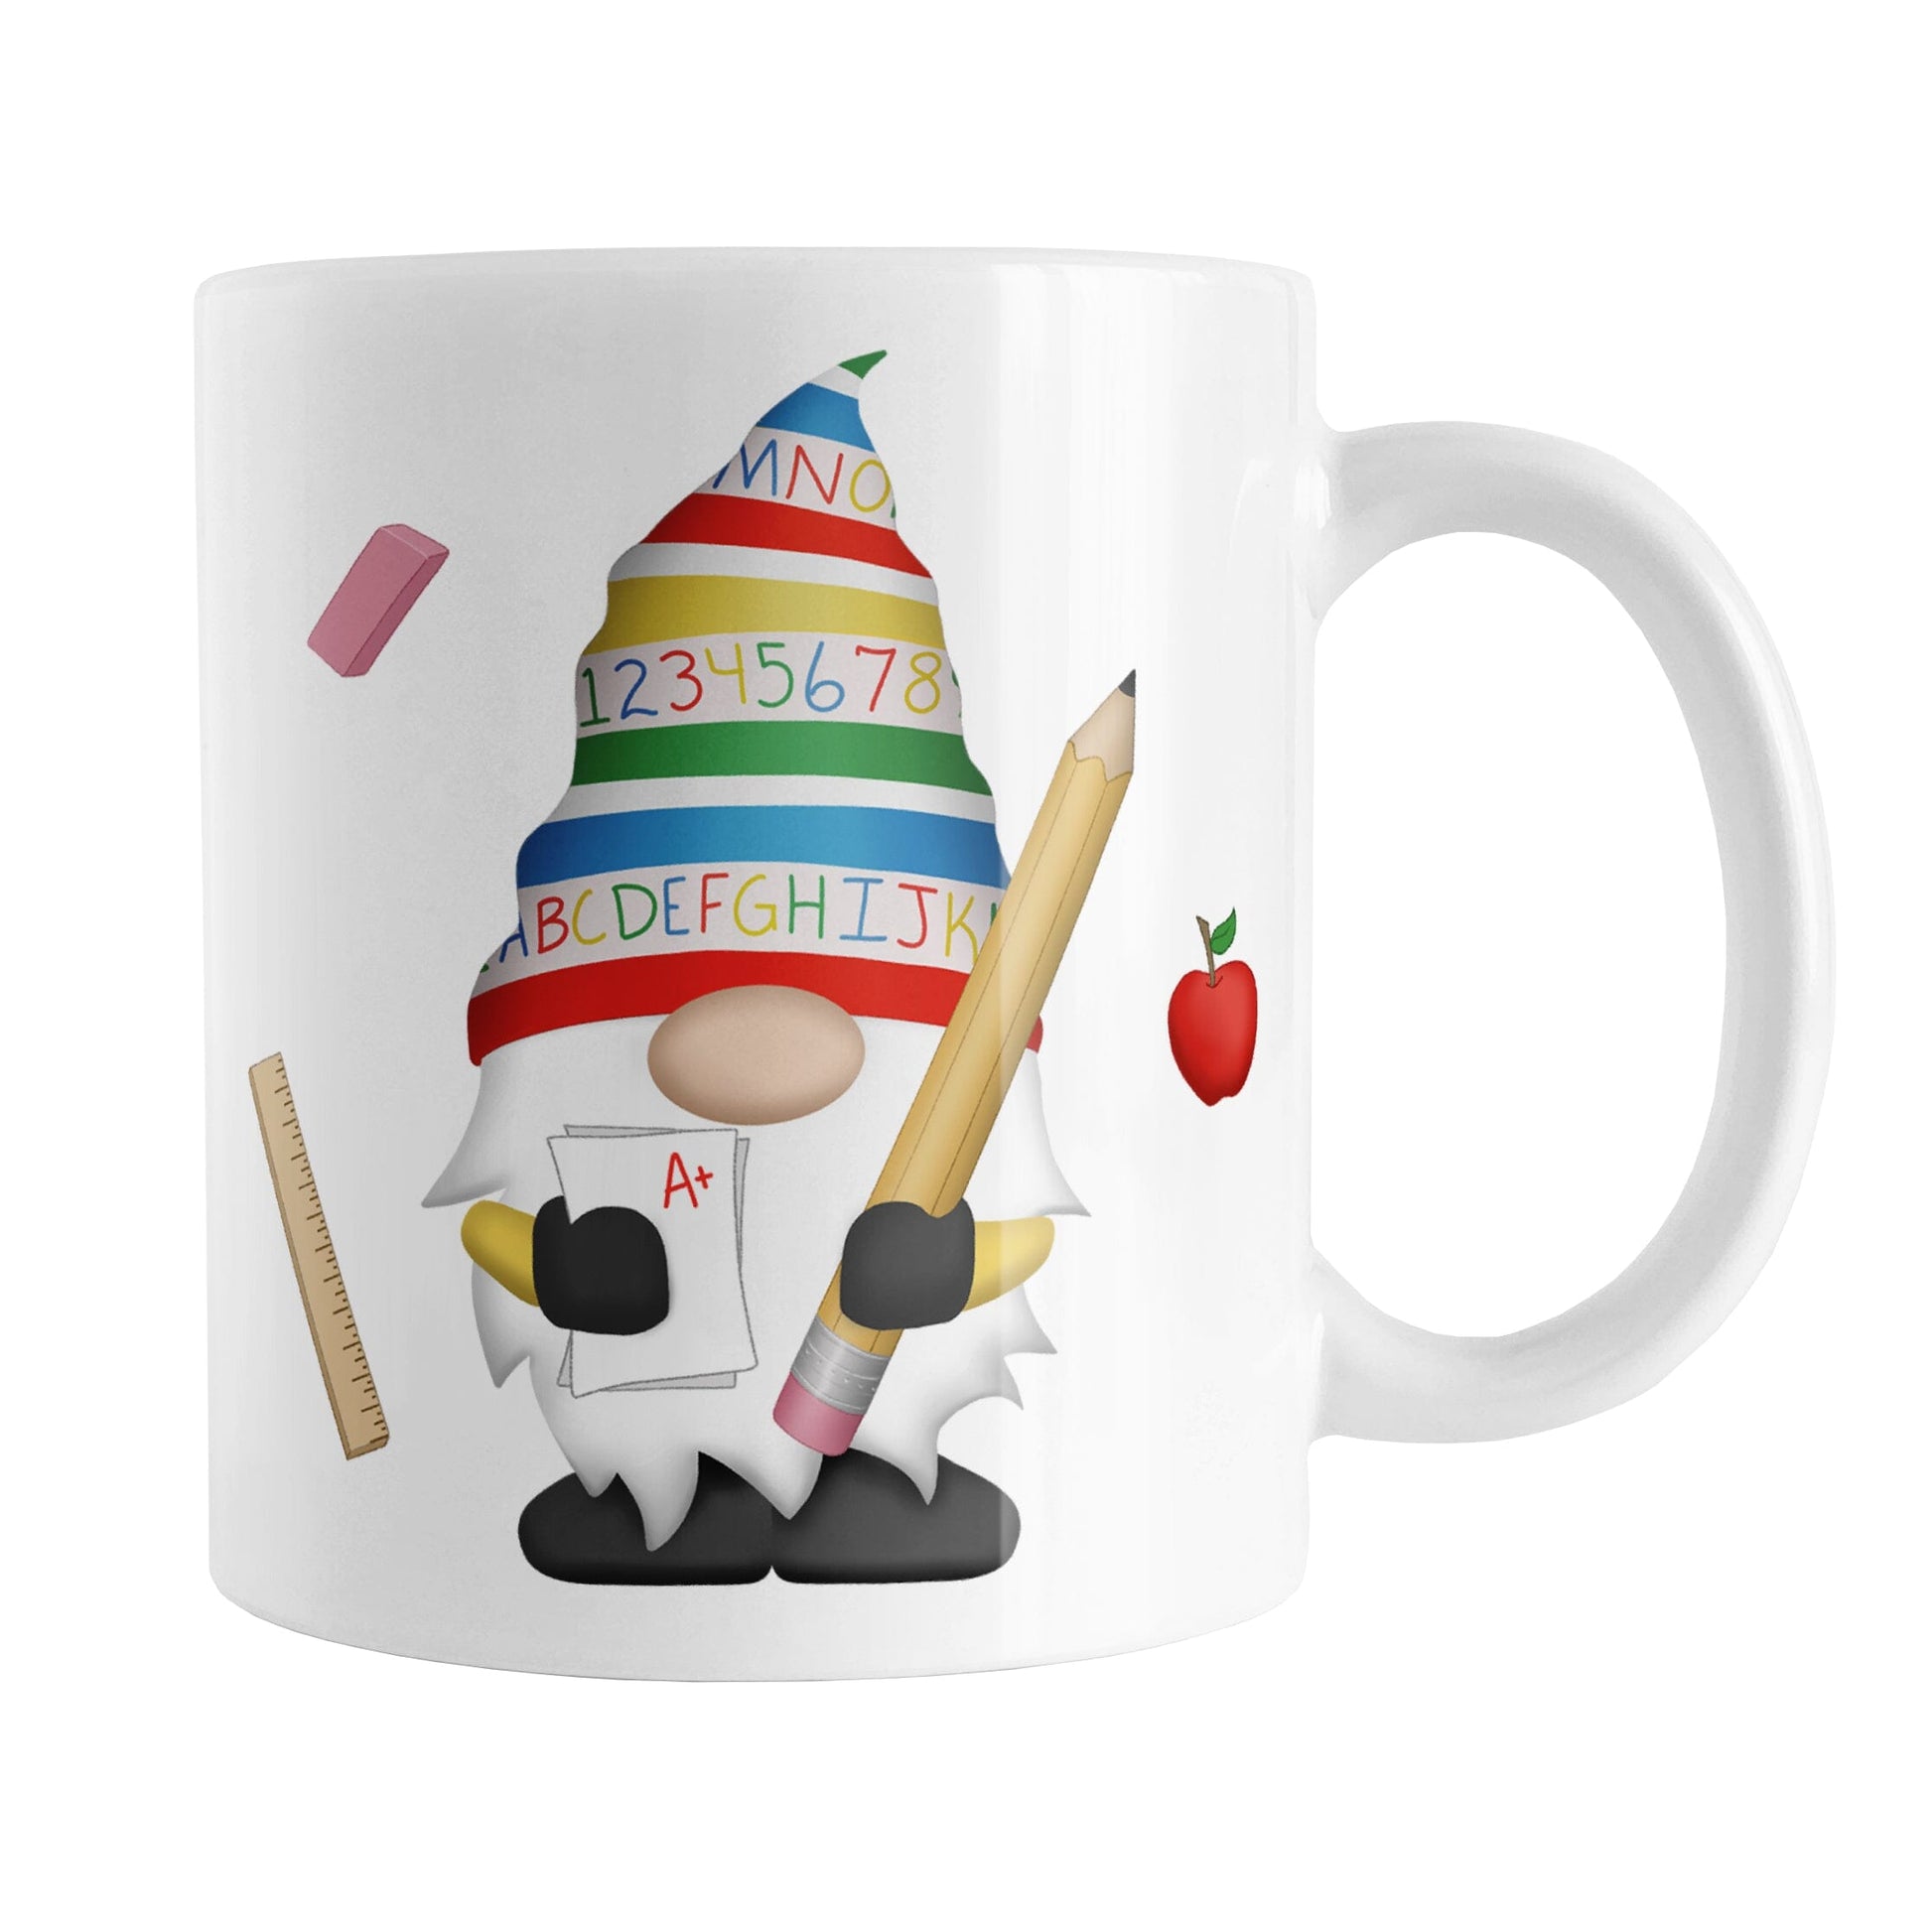 School Teacher Gnome Mug (11oz) at Amy's Coffee Mugs. A ceramic coffee mug designed with an illustration of an adorable gnome wearing a festive hat with numbers and letters in primary colors and holding a large oversized pencil and graded A+ paper. Around the gnome is an eraser, a ruler, and a red apple.